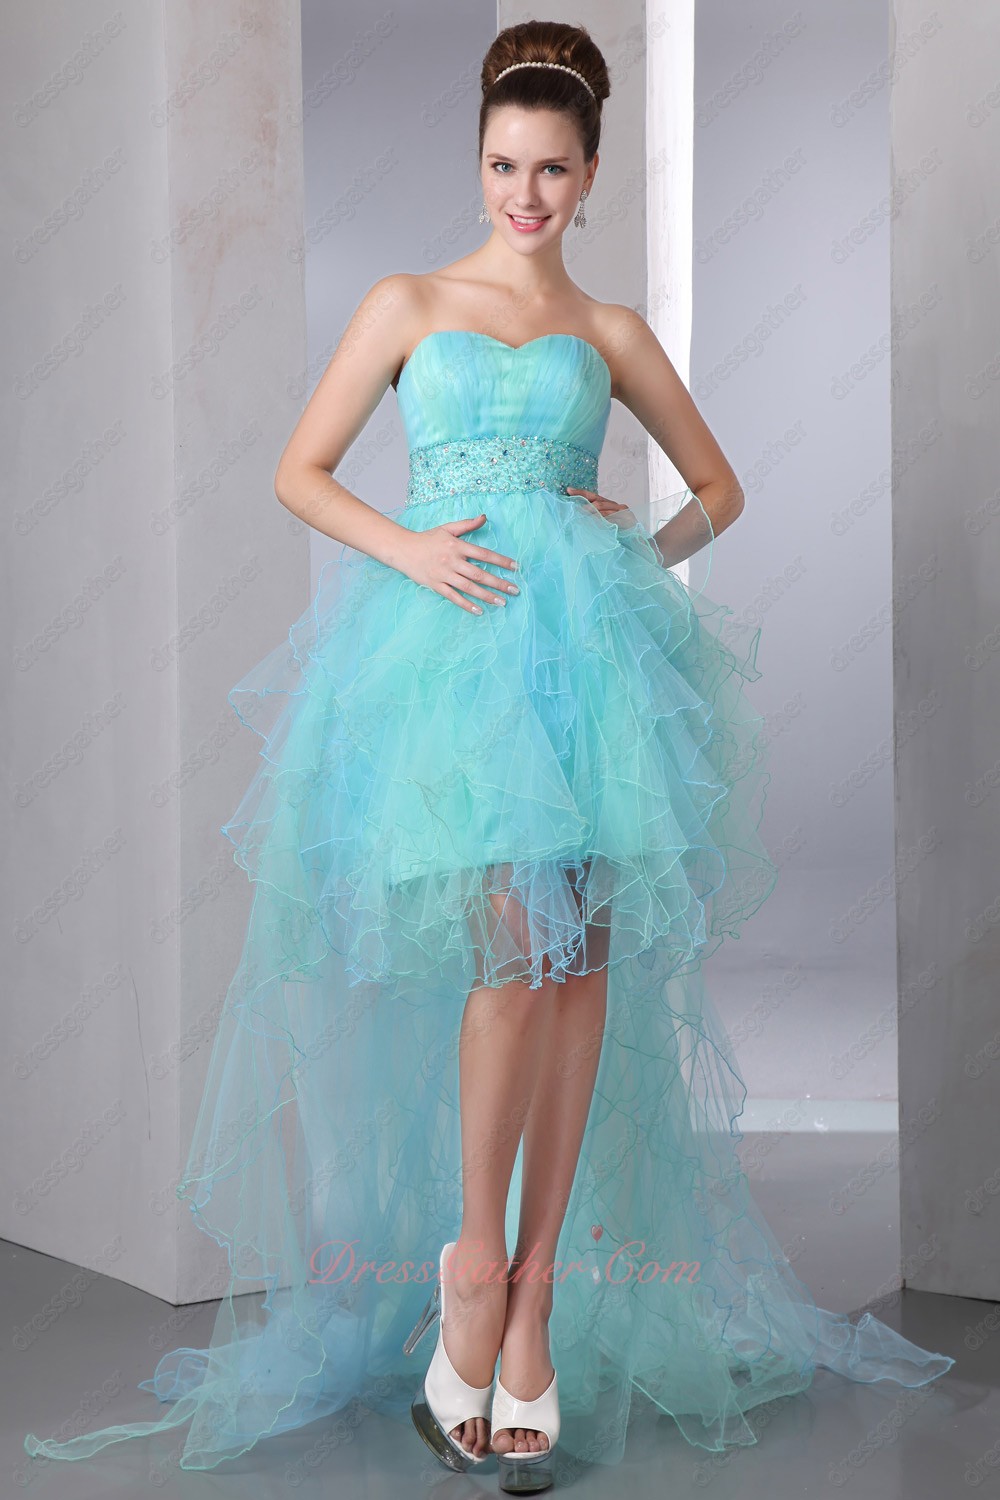 High Low Aqua and Mint Mingled Tulle Ruffles Cocktail Party Dress With Beading Belt - Click Image to Close